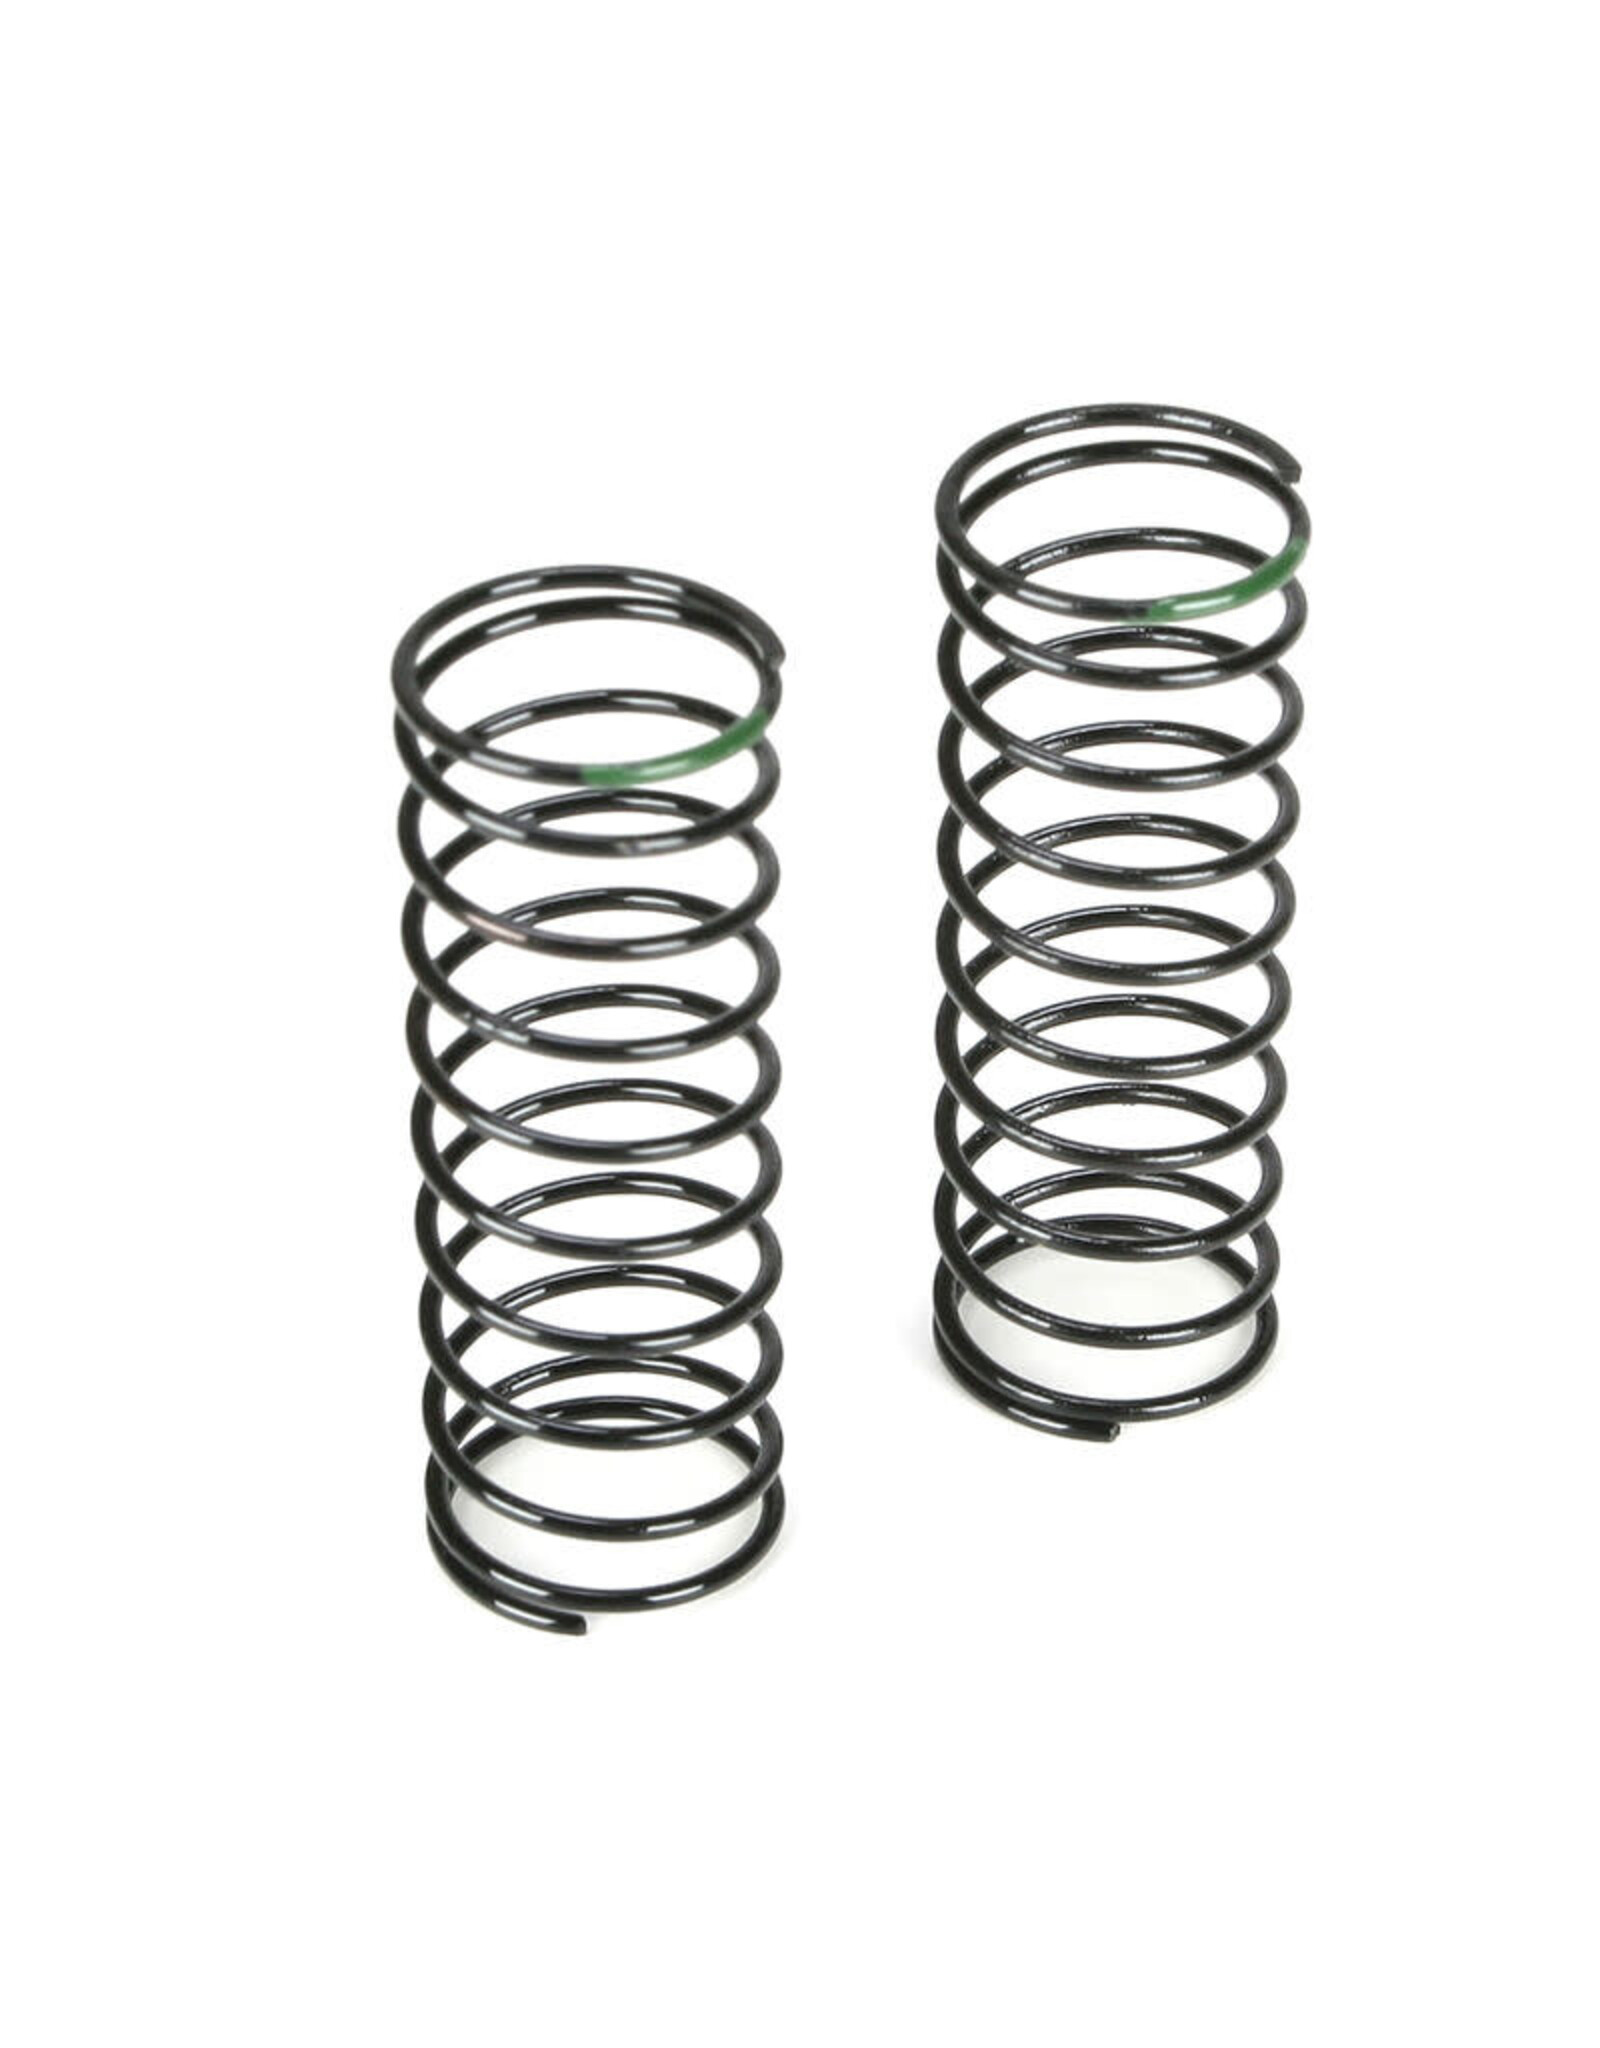 Team Losi Racing Front Shock Spring, 3.5 Rate, Green: 22T